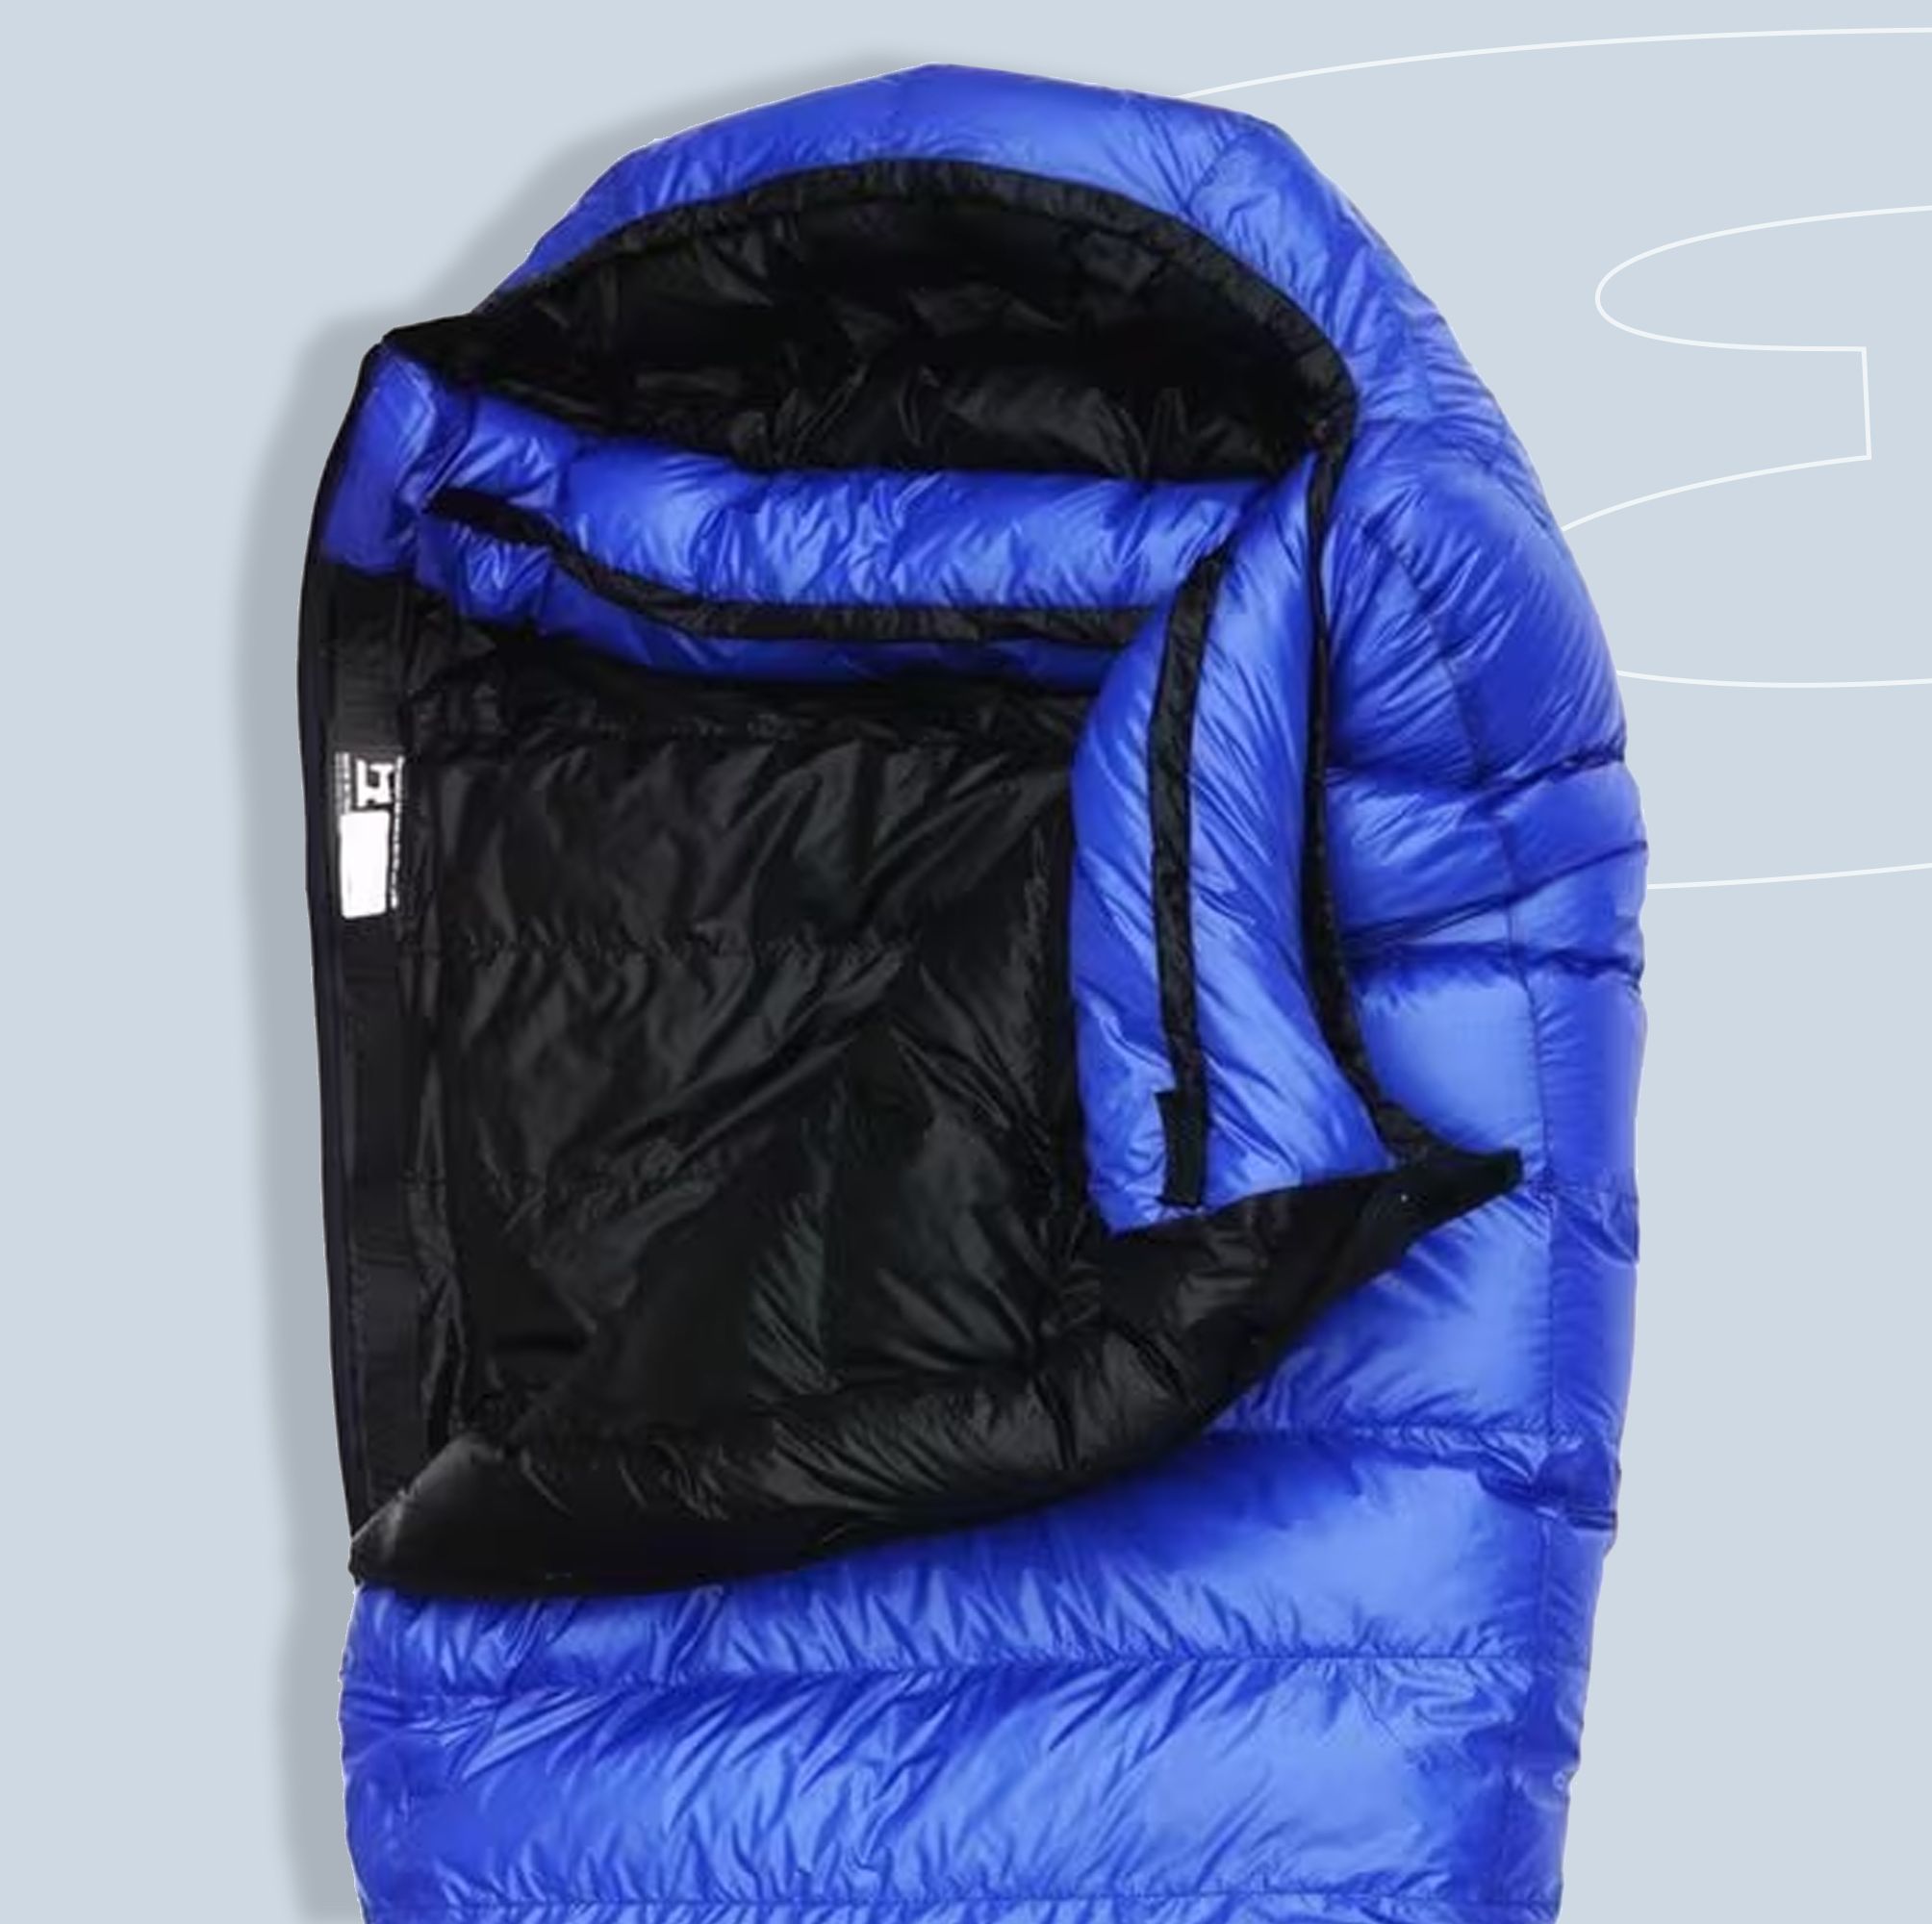 4 Ultralight Sleeping Bags to Help Take the Load Off Your Back